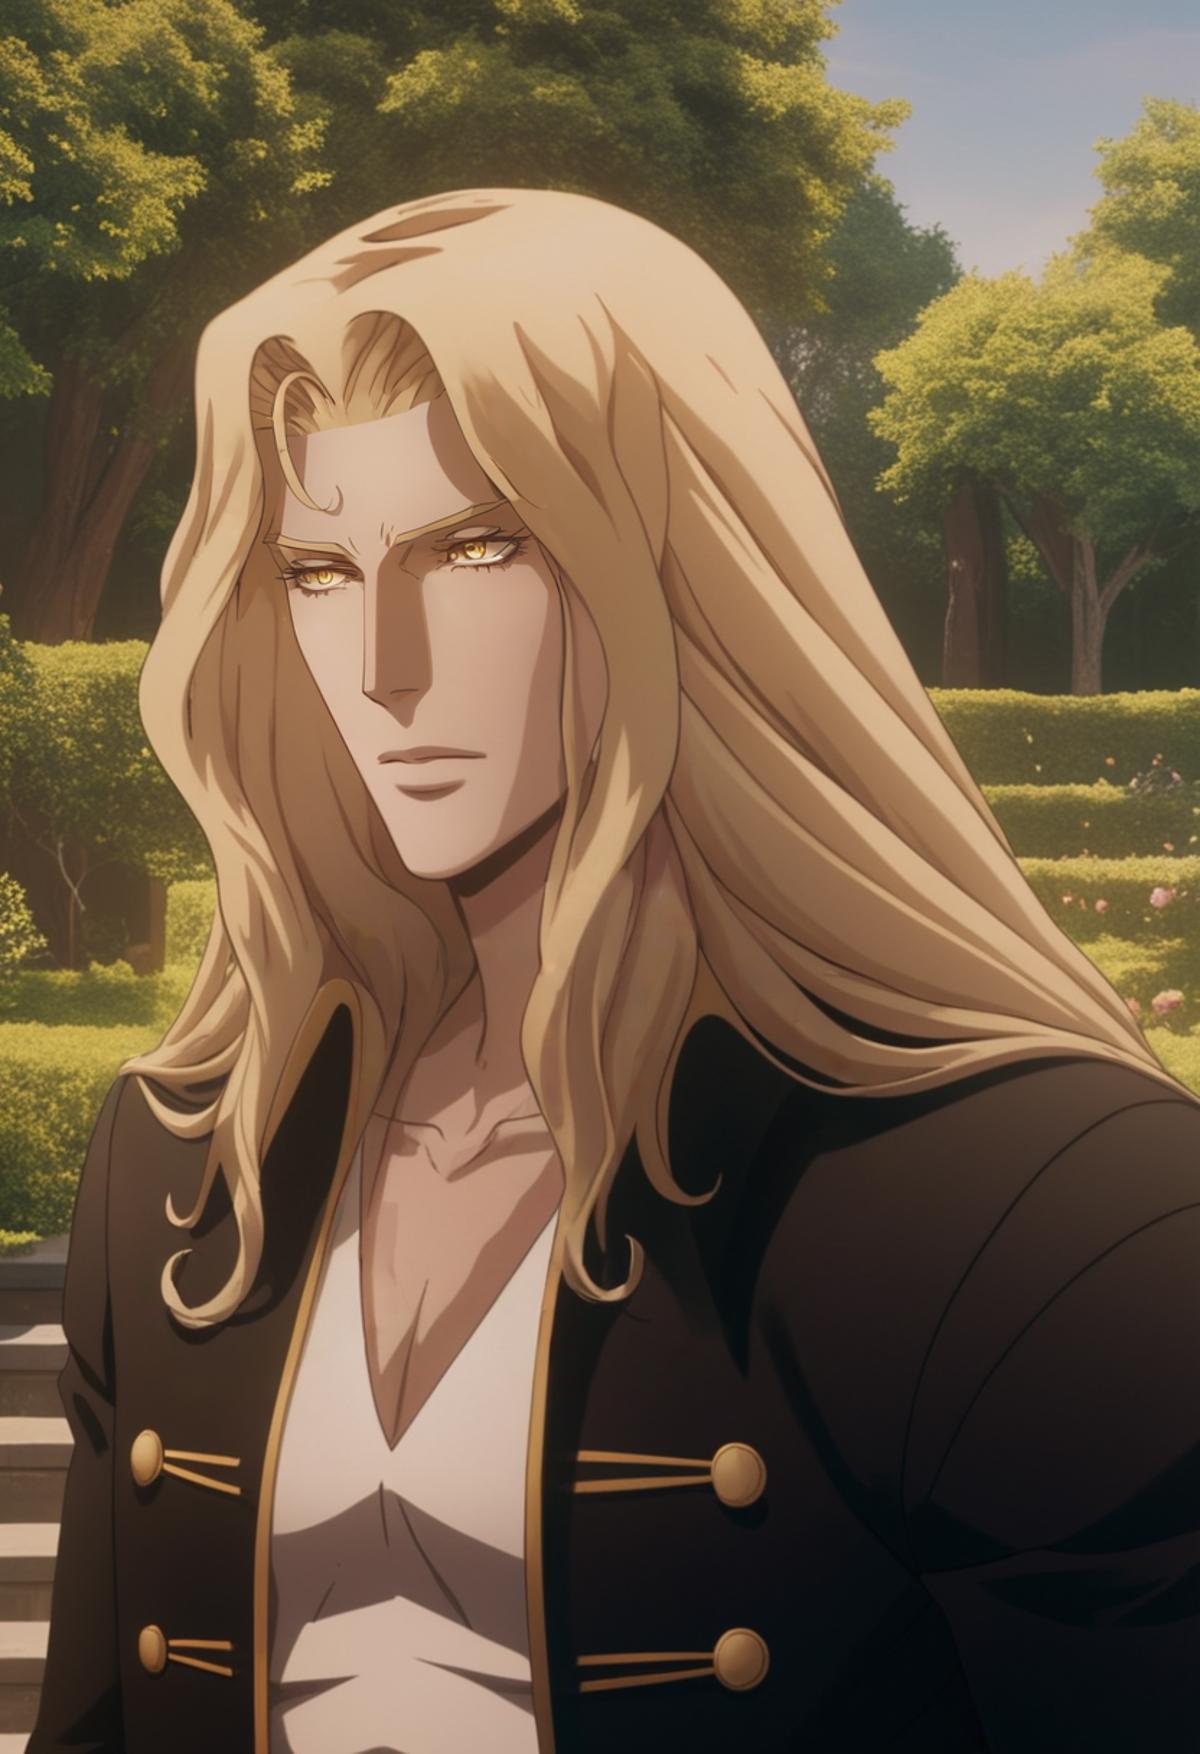 Alucard (Castlevania, 2017 animated series ver.) image by chubbypillow93